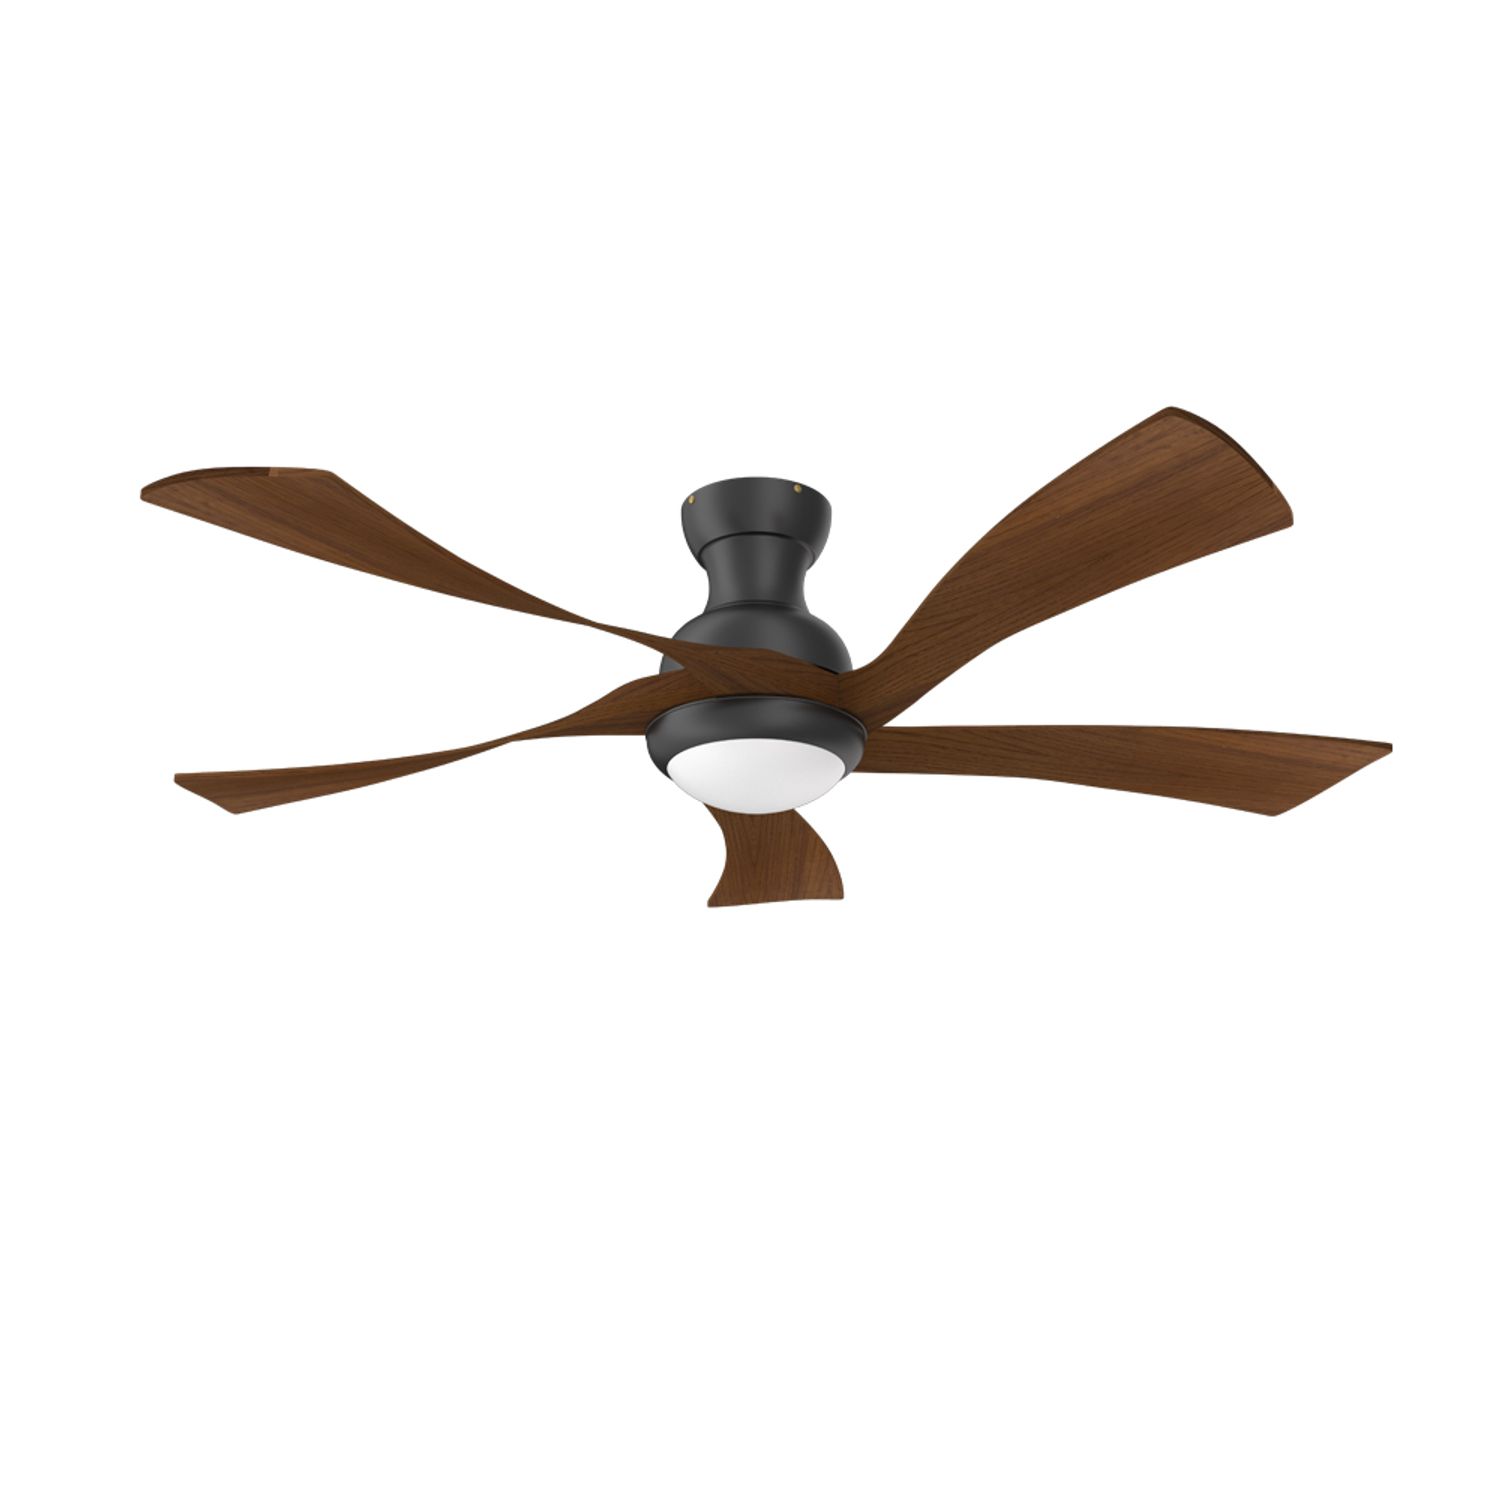 KBS 5-Blade Unique Dark Wooden Ceiling Fan with Lights & Remote